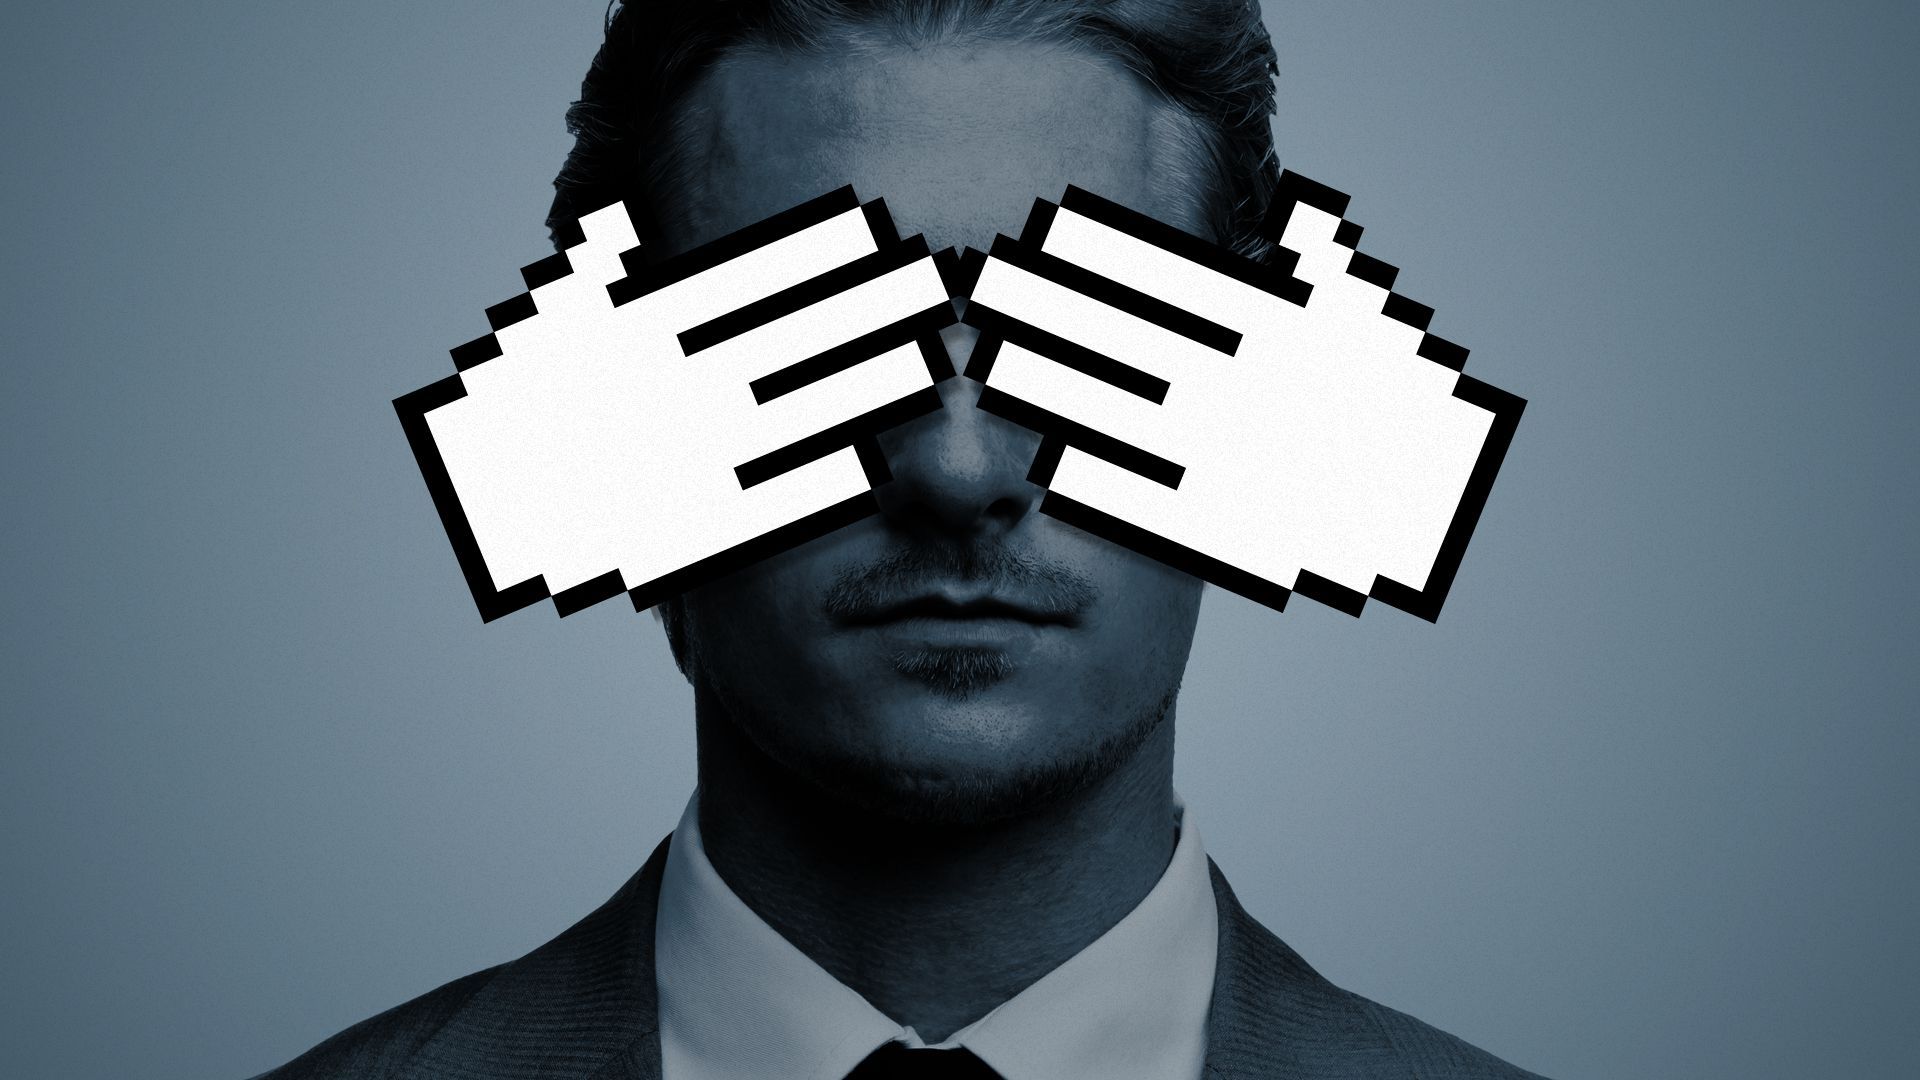 Illustration of cursor hands covering the eyes of a person in a suit.